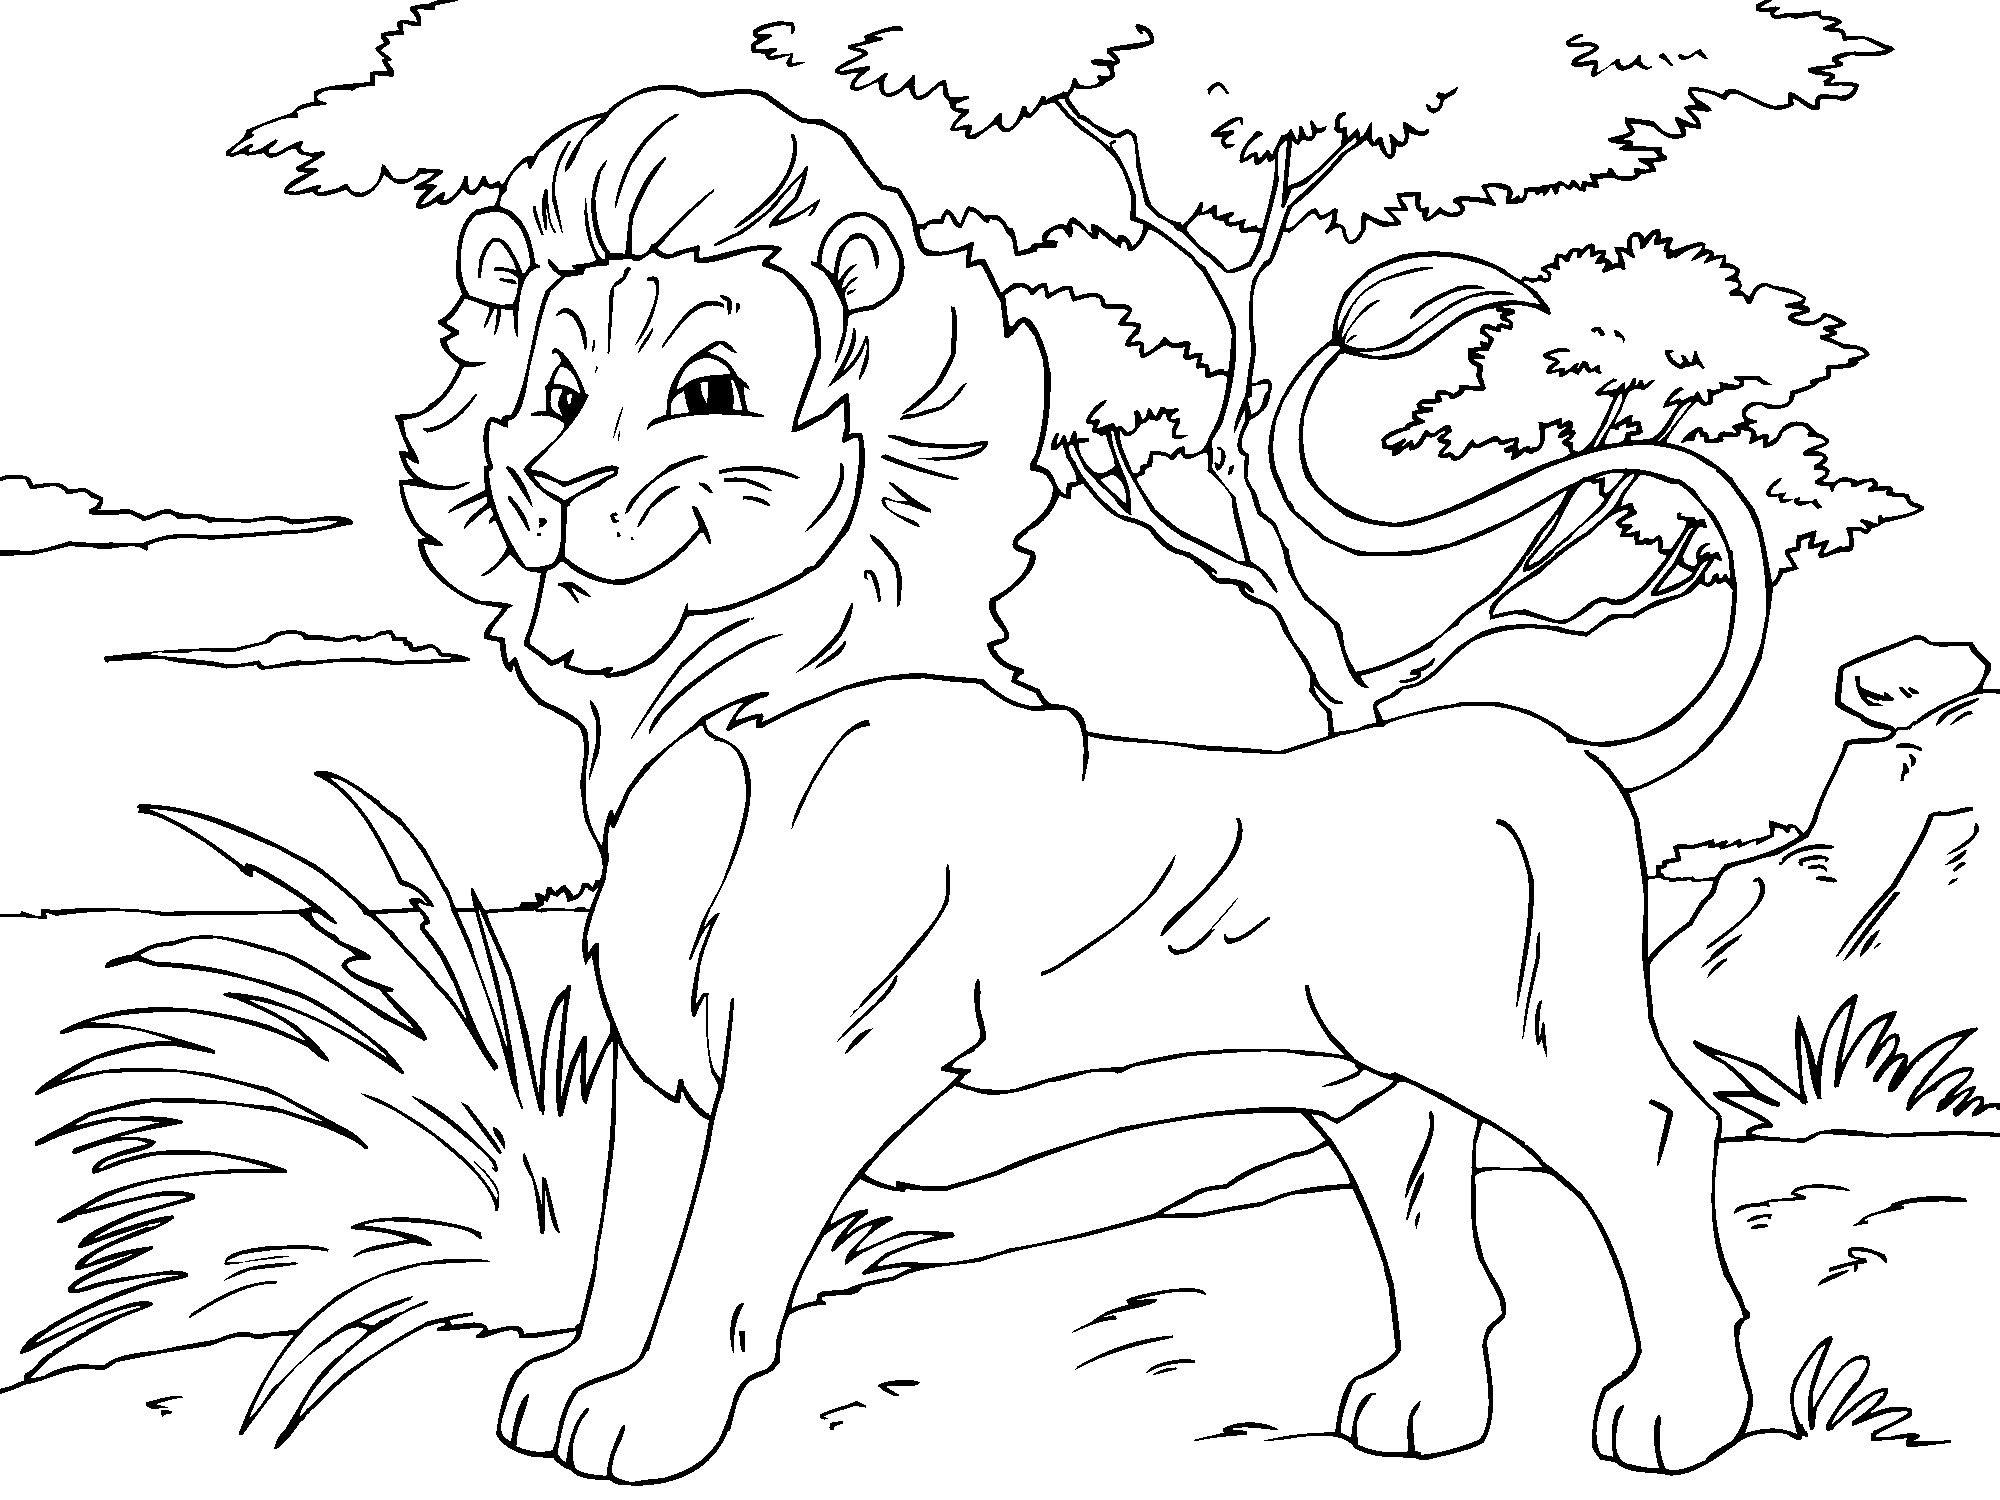 Simple Lion coloring page to download for free